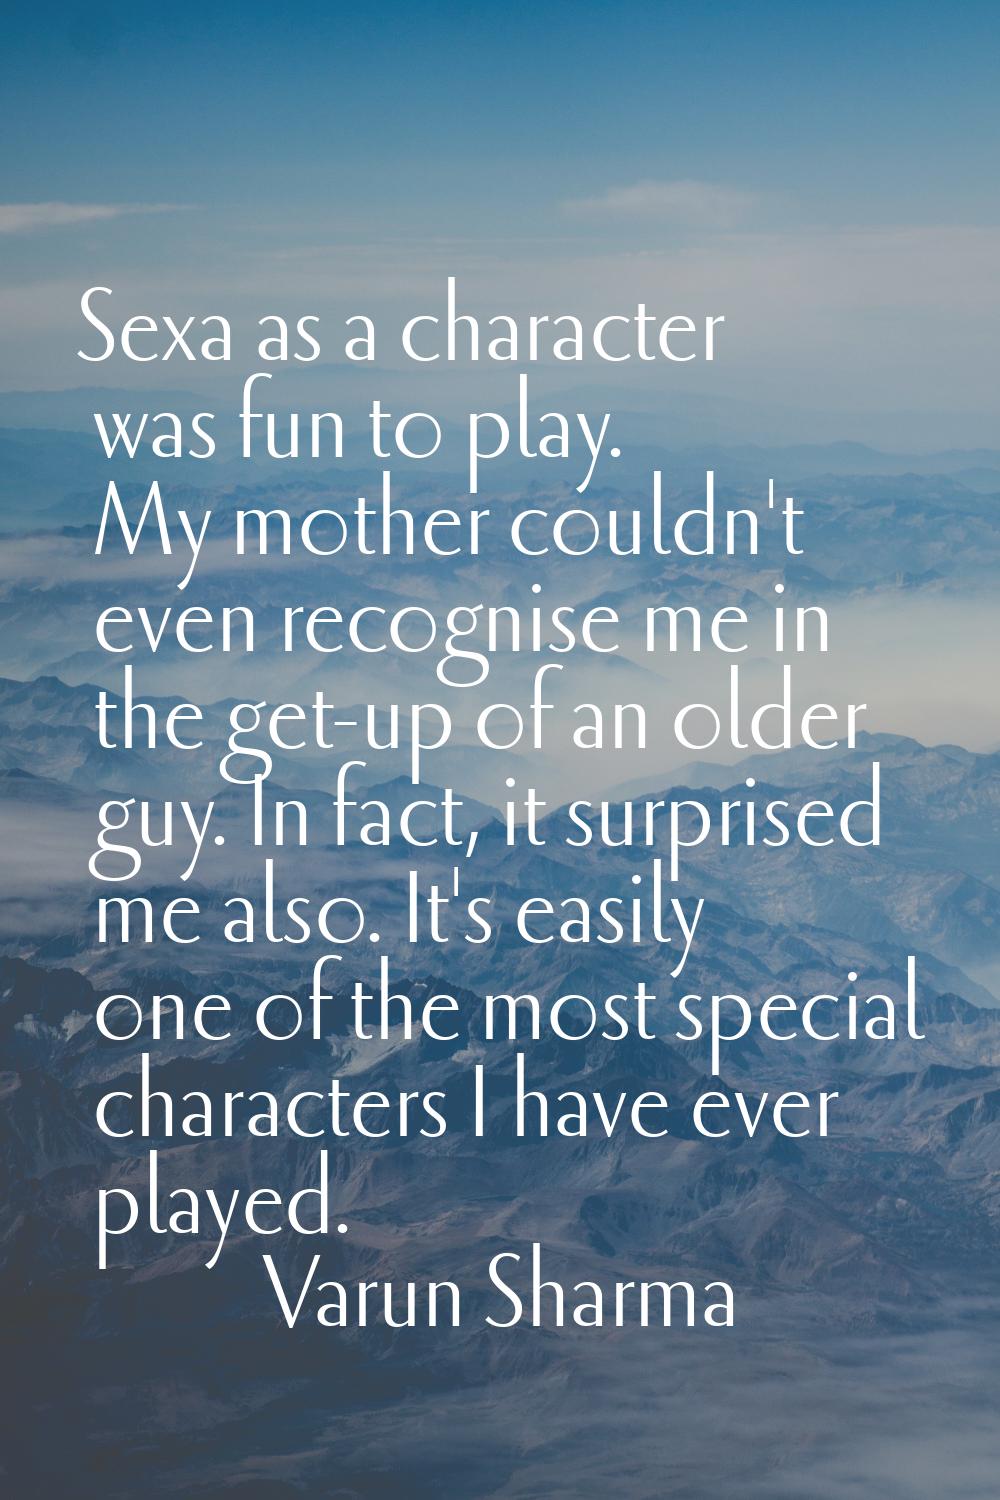 Sexa as a character was fun to play. My mother couldn't even recognise me in the get-up of an older